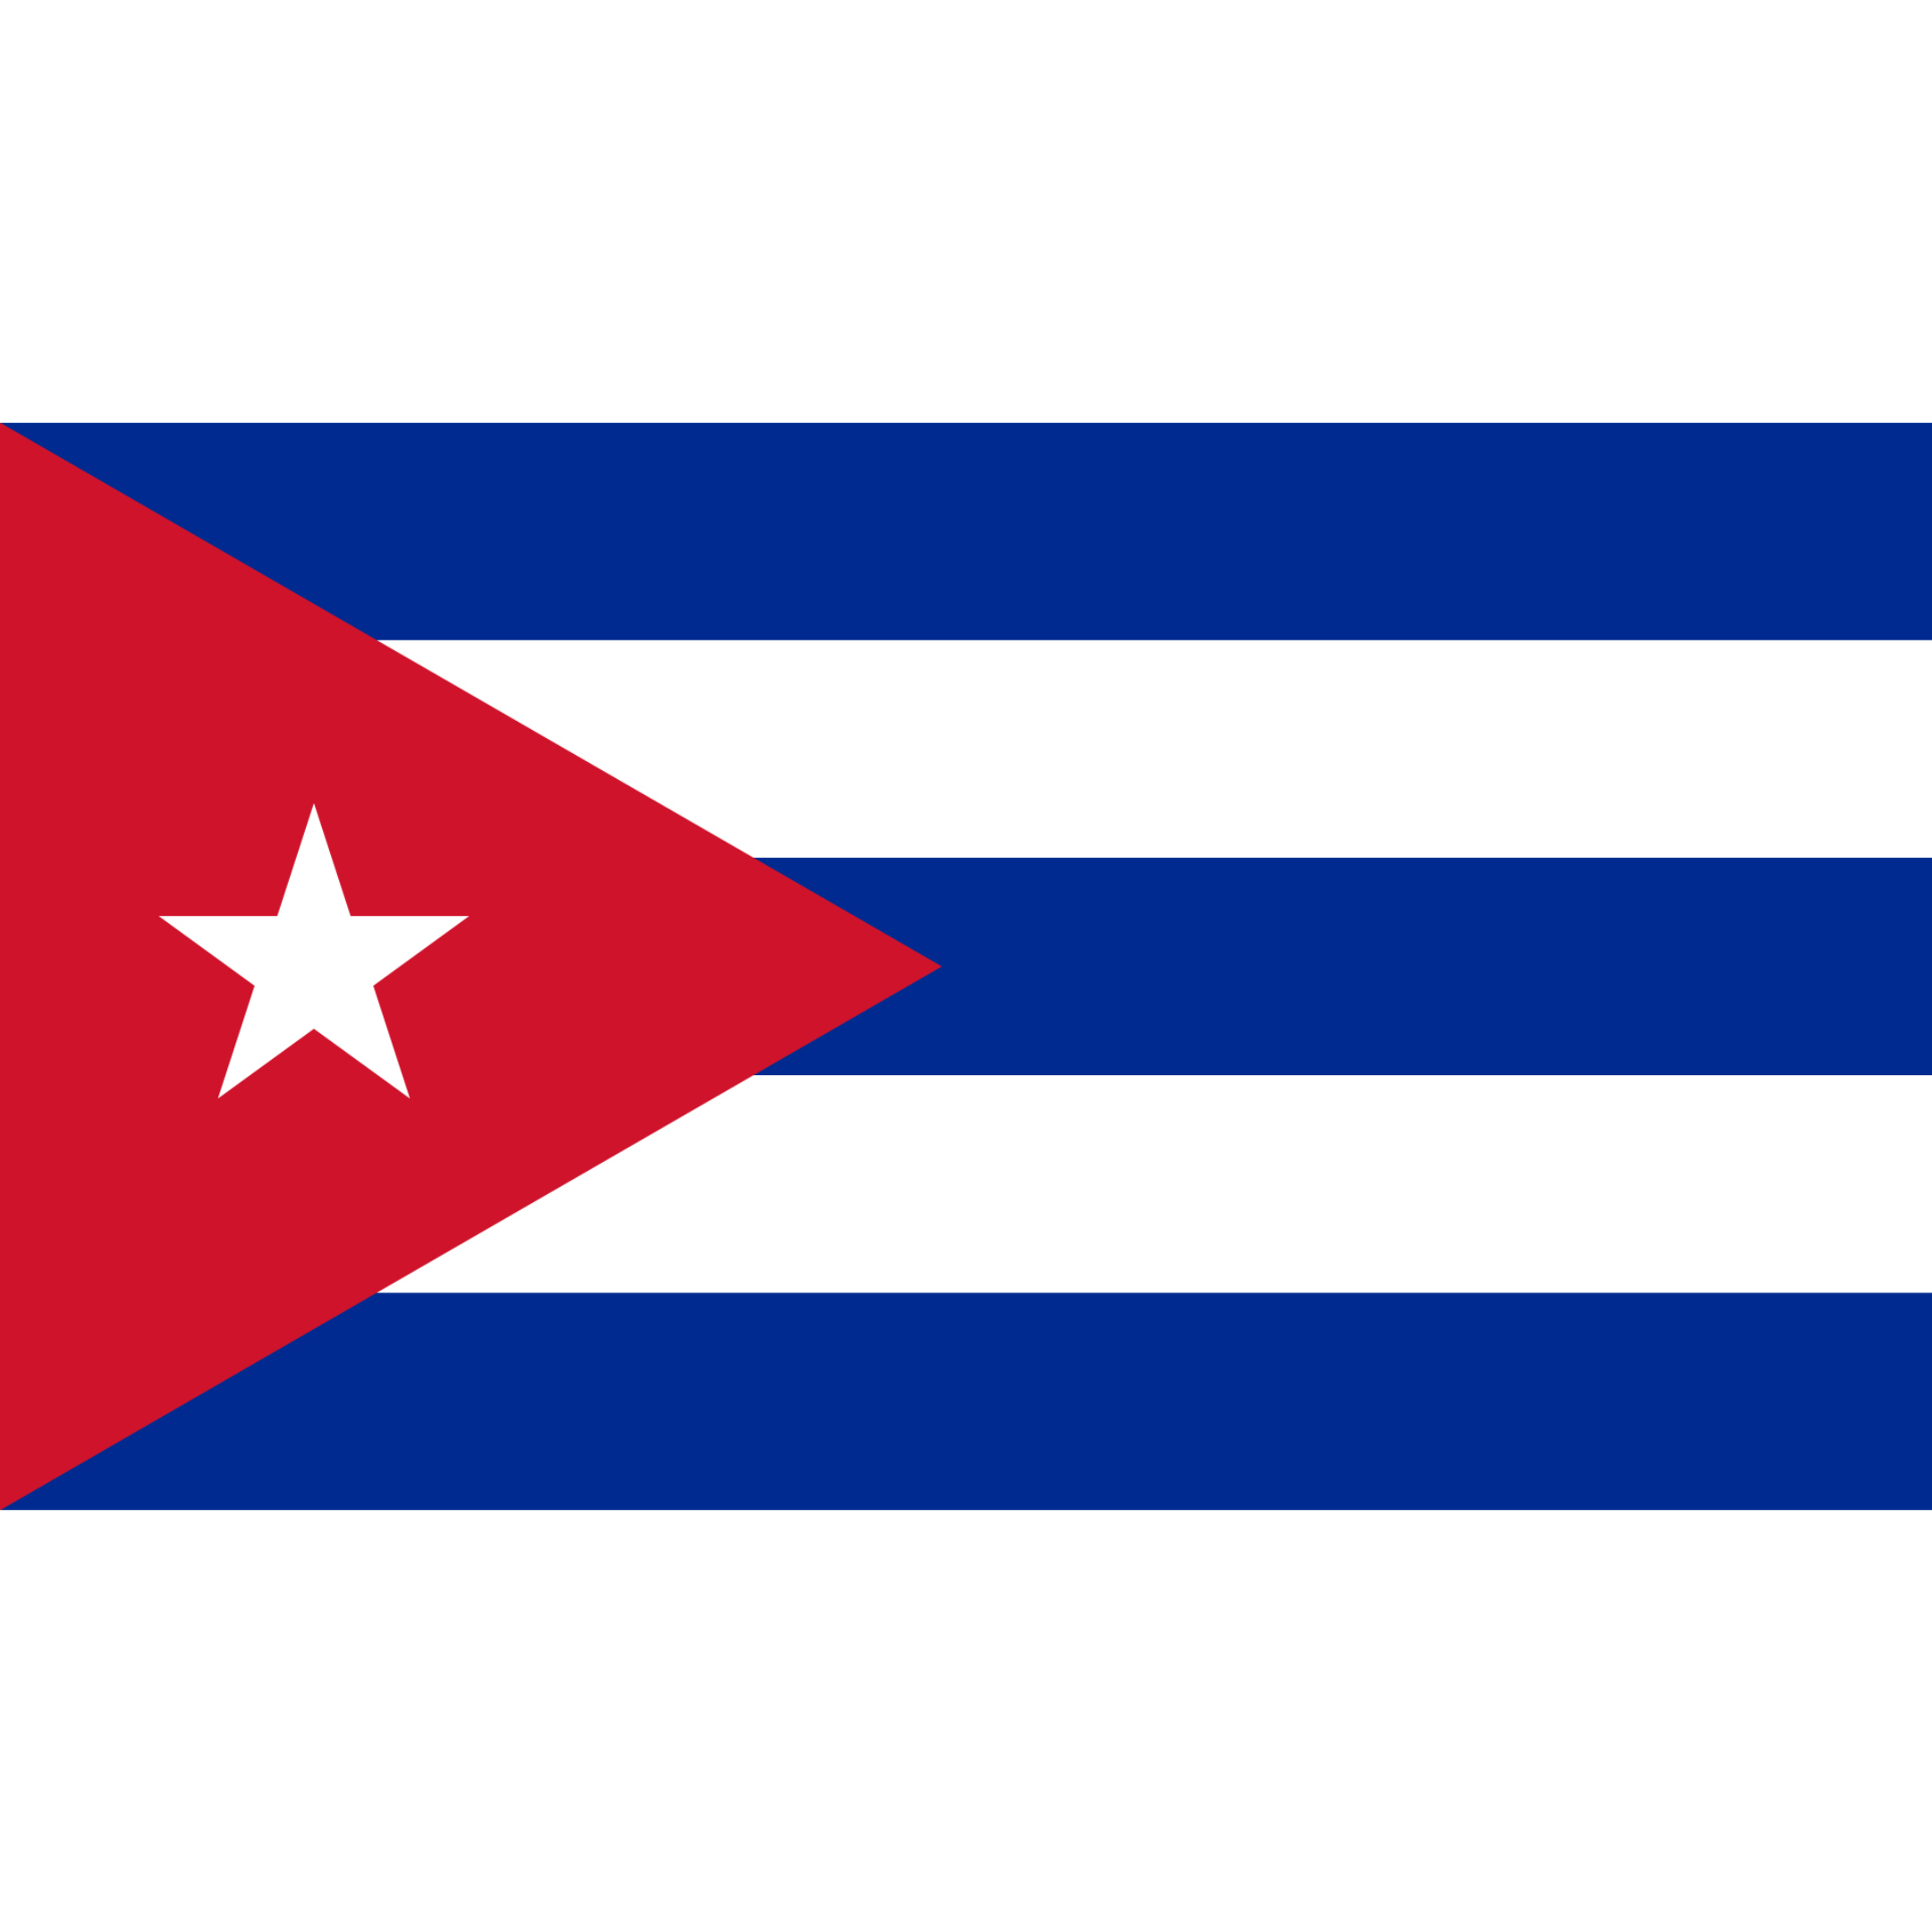 The Cuban flag has 5 horizontal blue and red stripes, and a red triangle on the left containing a white five-pointed star.